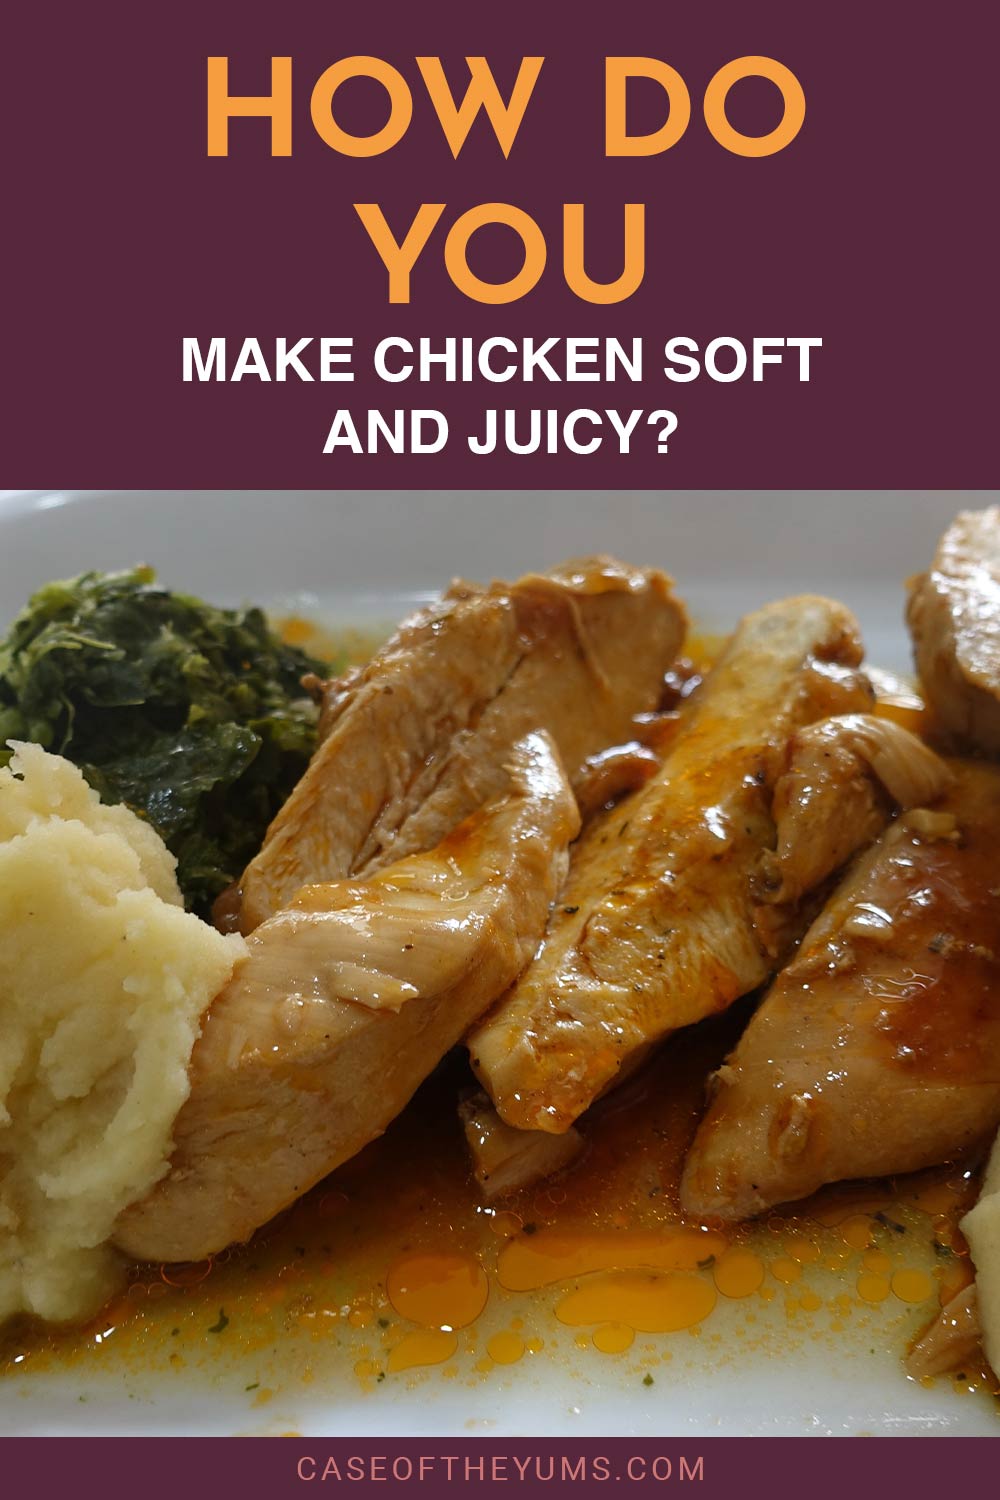 Chicken dish served on a white plate - How do You make chicken soft and juicy?